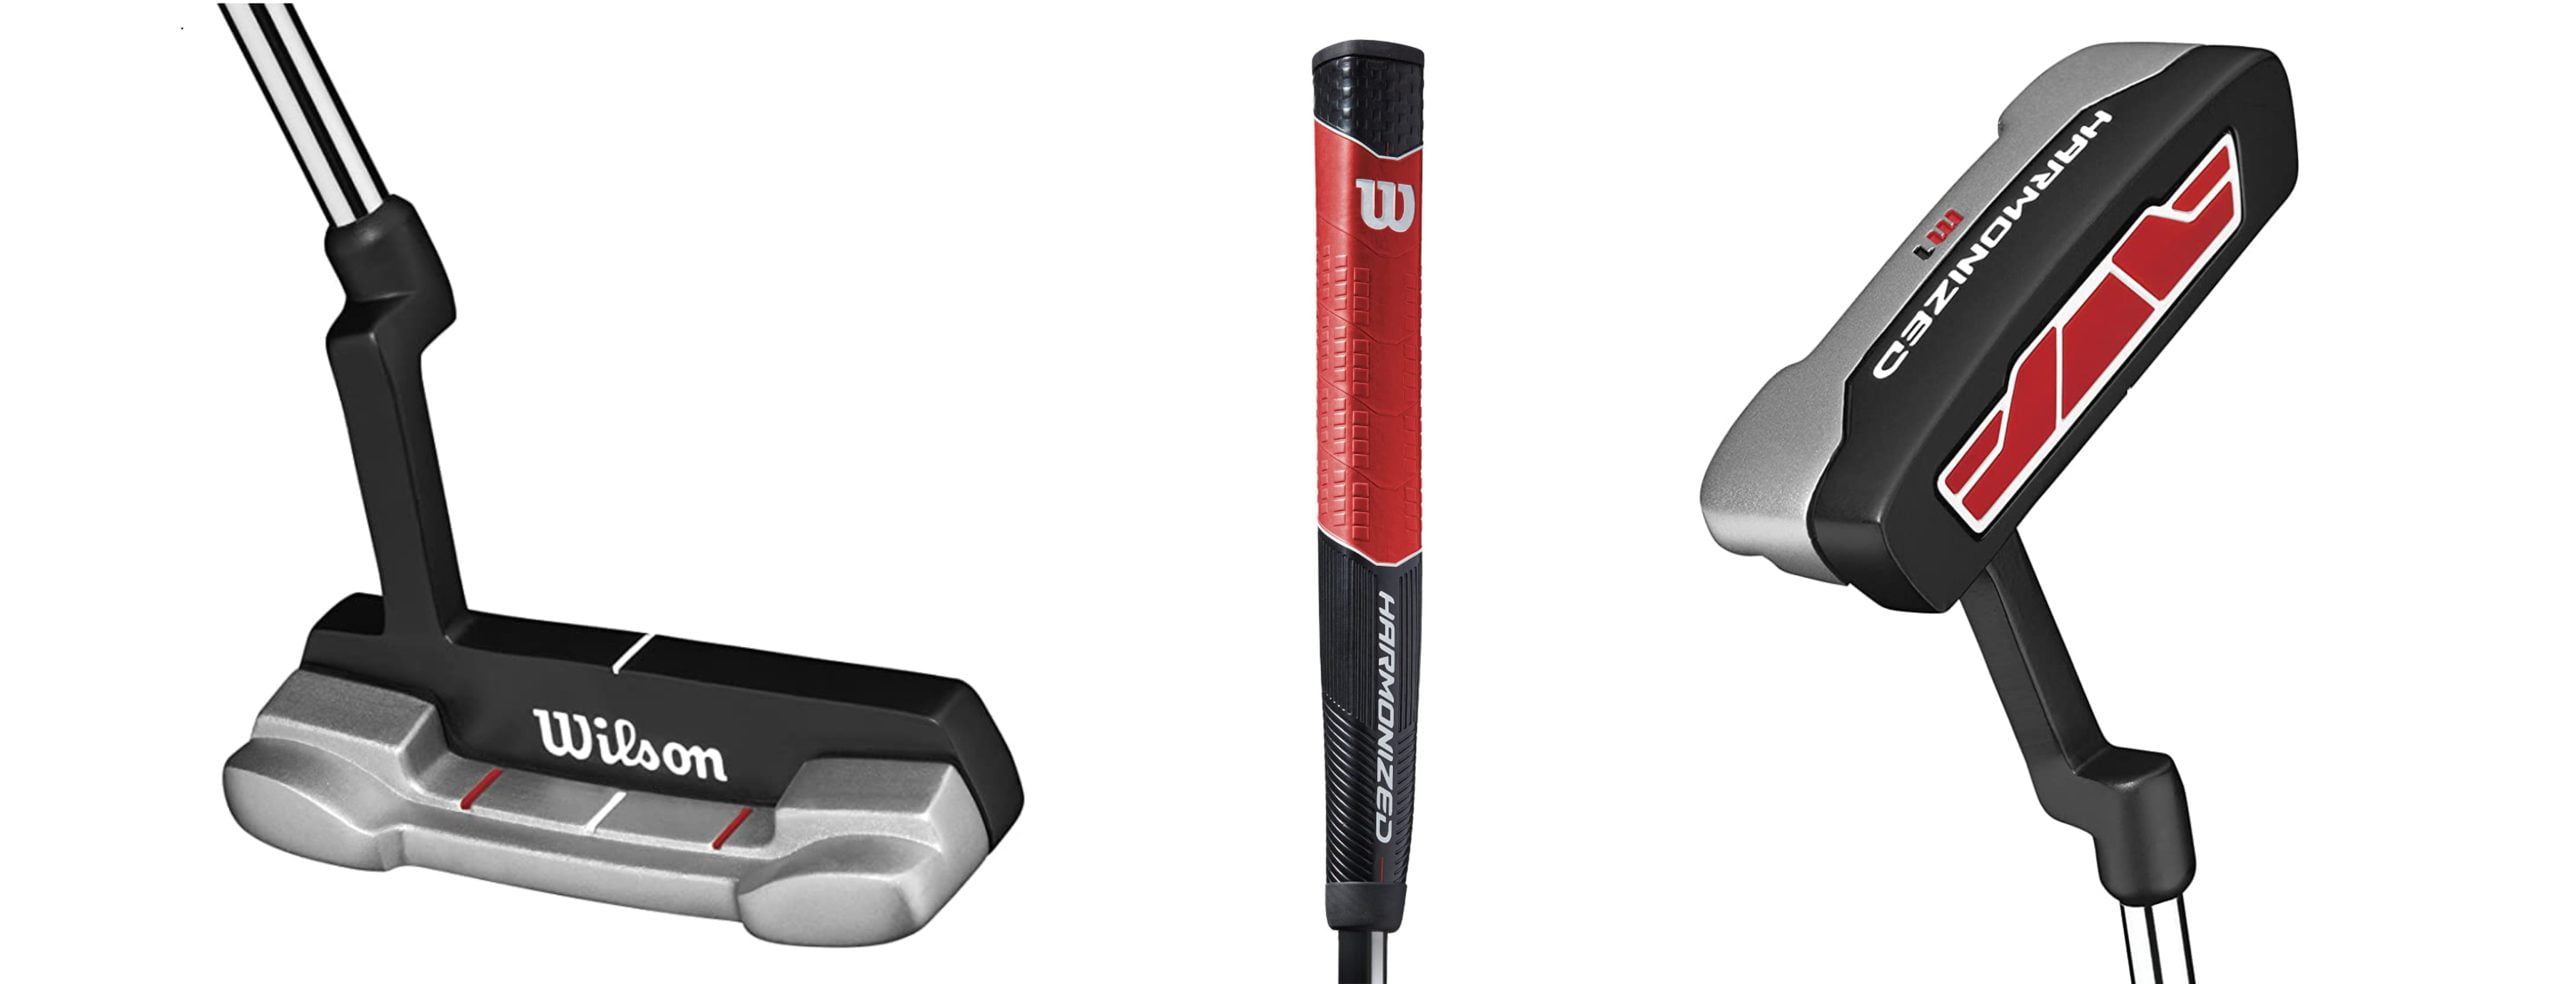 best golf putters for the price